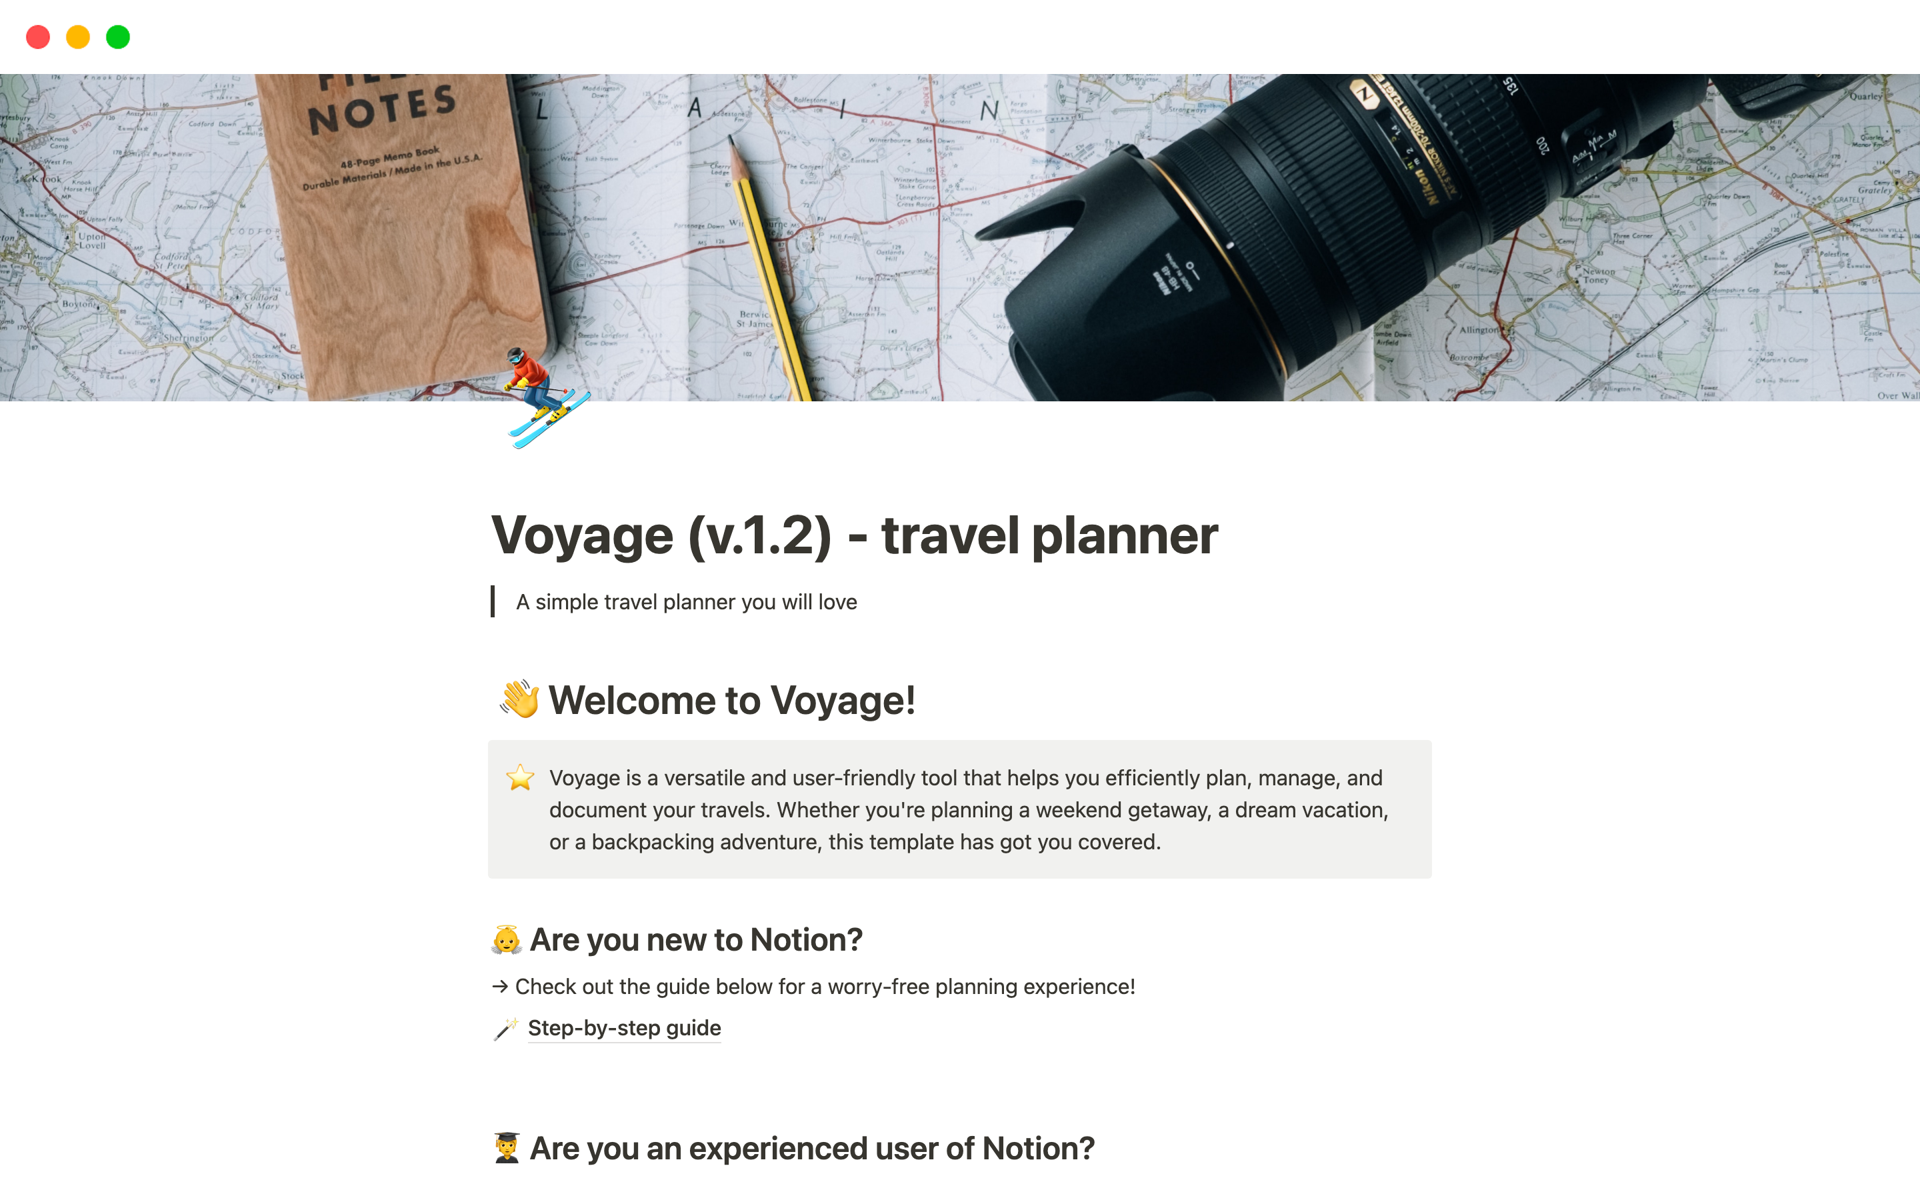 Voyage is a versatile and user-friendly tool that helps you efficiently plan, manage, and document your travels.